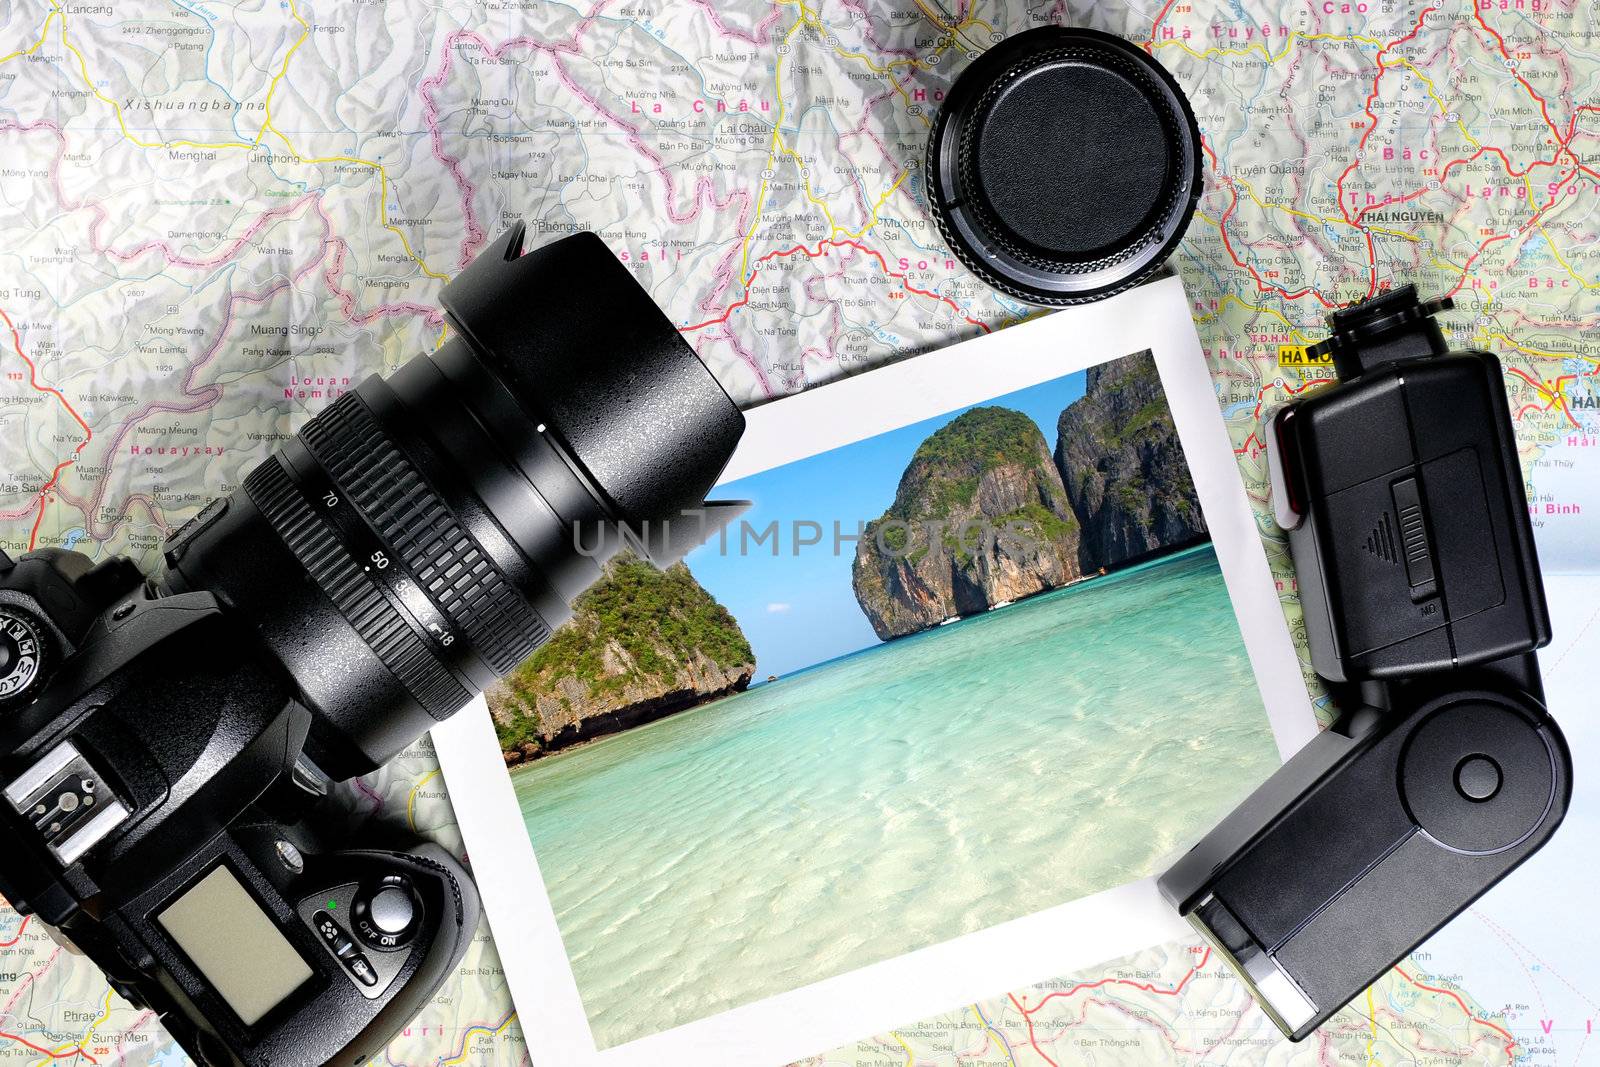 Digital camera, lens, flash and a photo layed on top of a map of Thailand
